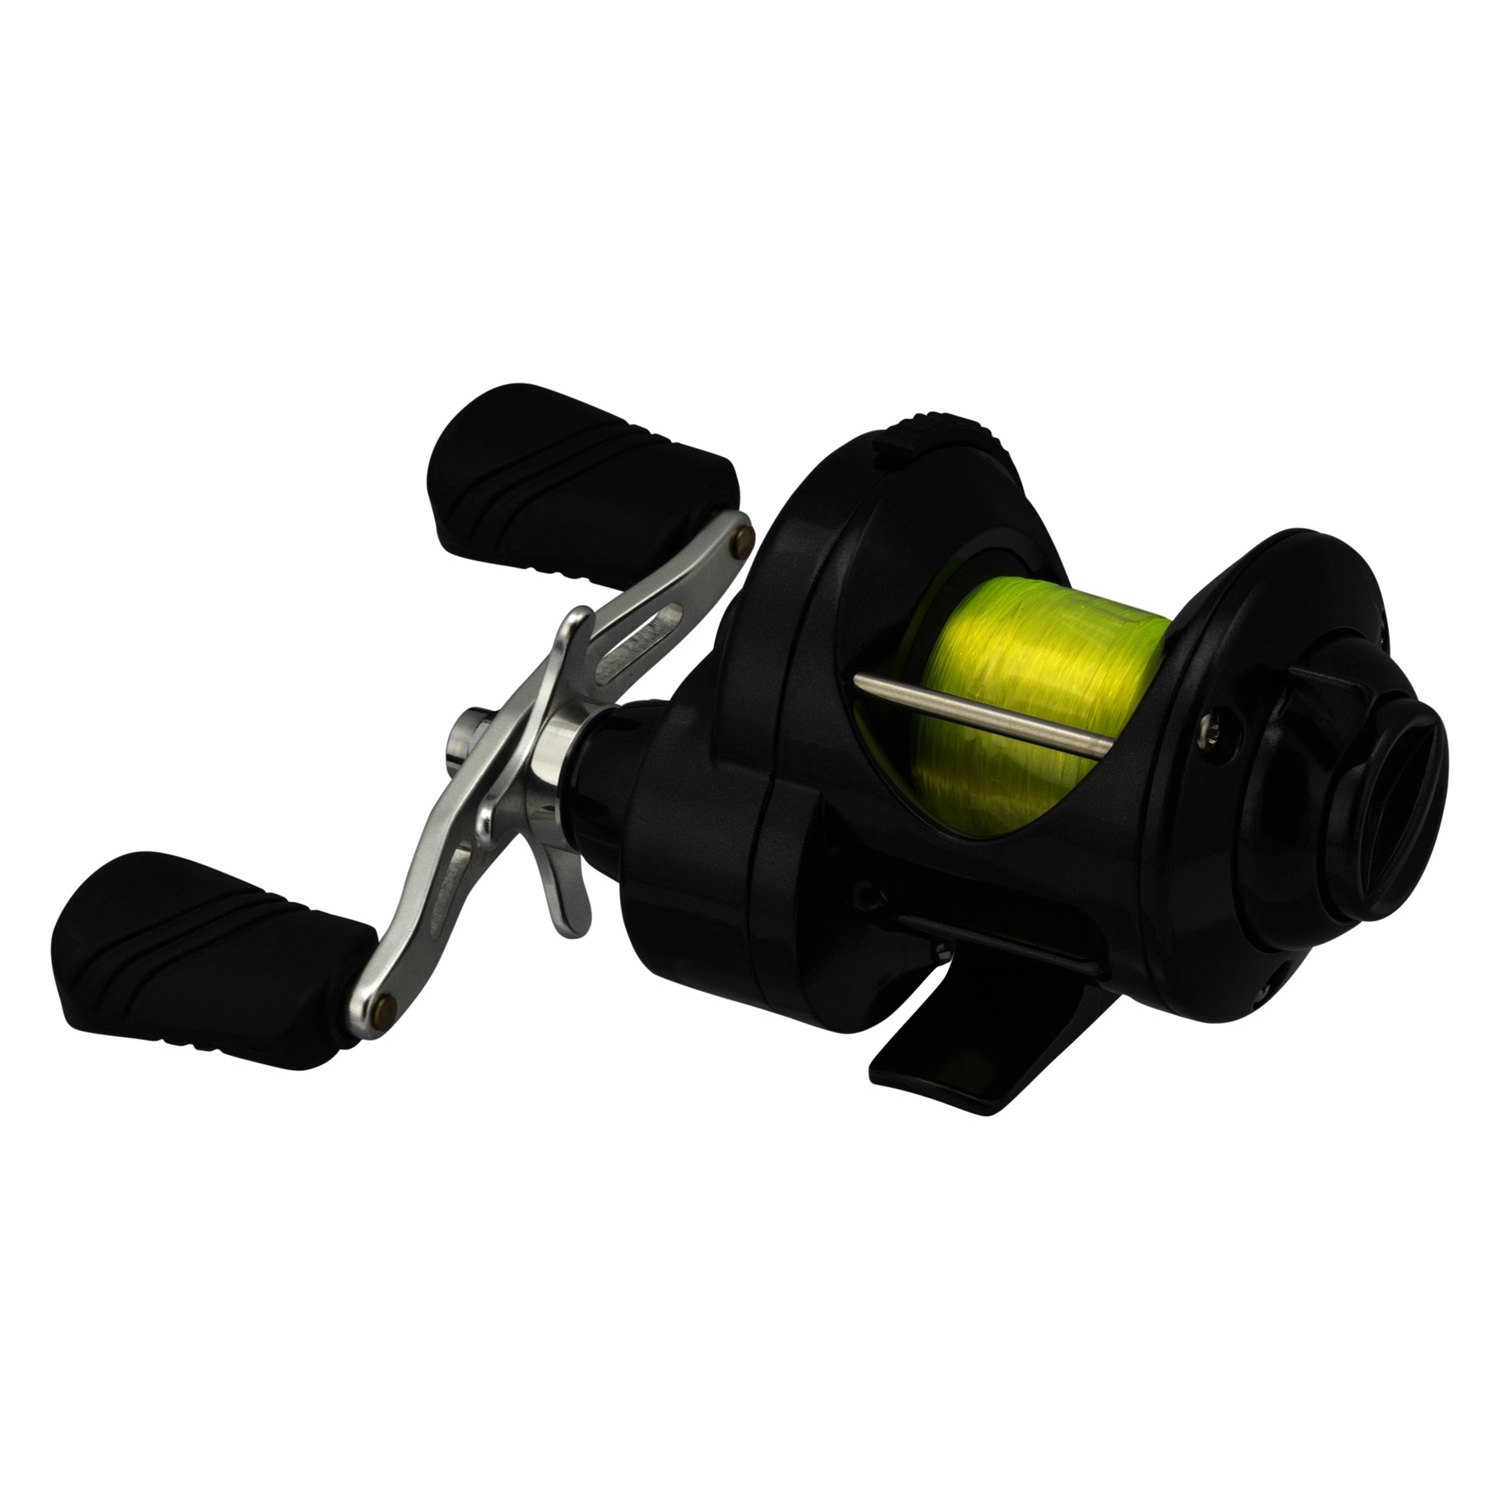 Lew's® WMR5 - Wally Marshall Signature Series 5.2:1 Crappie Reel